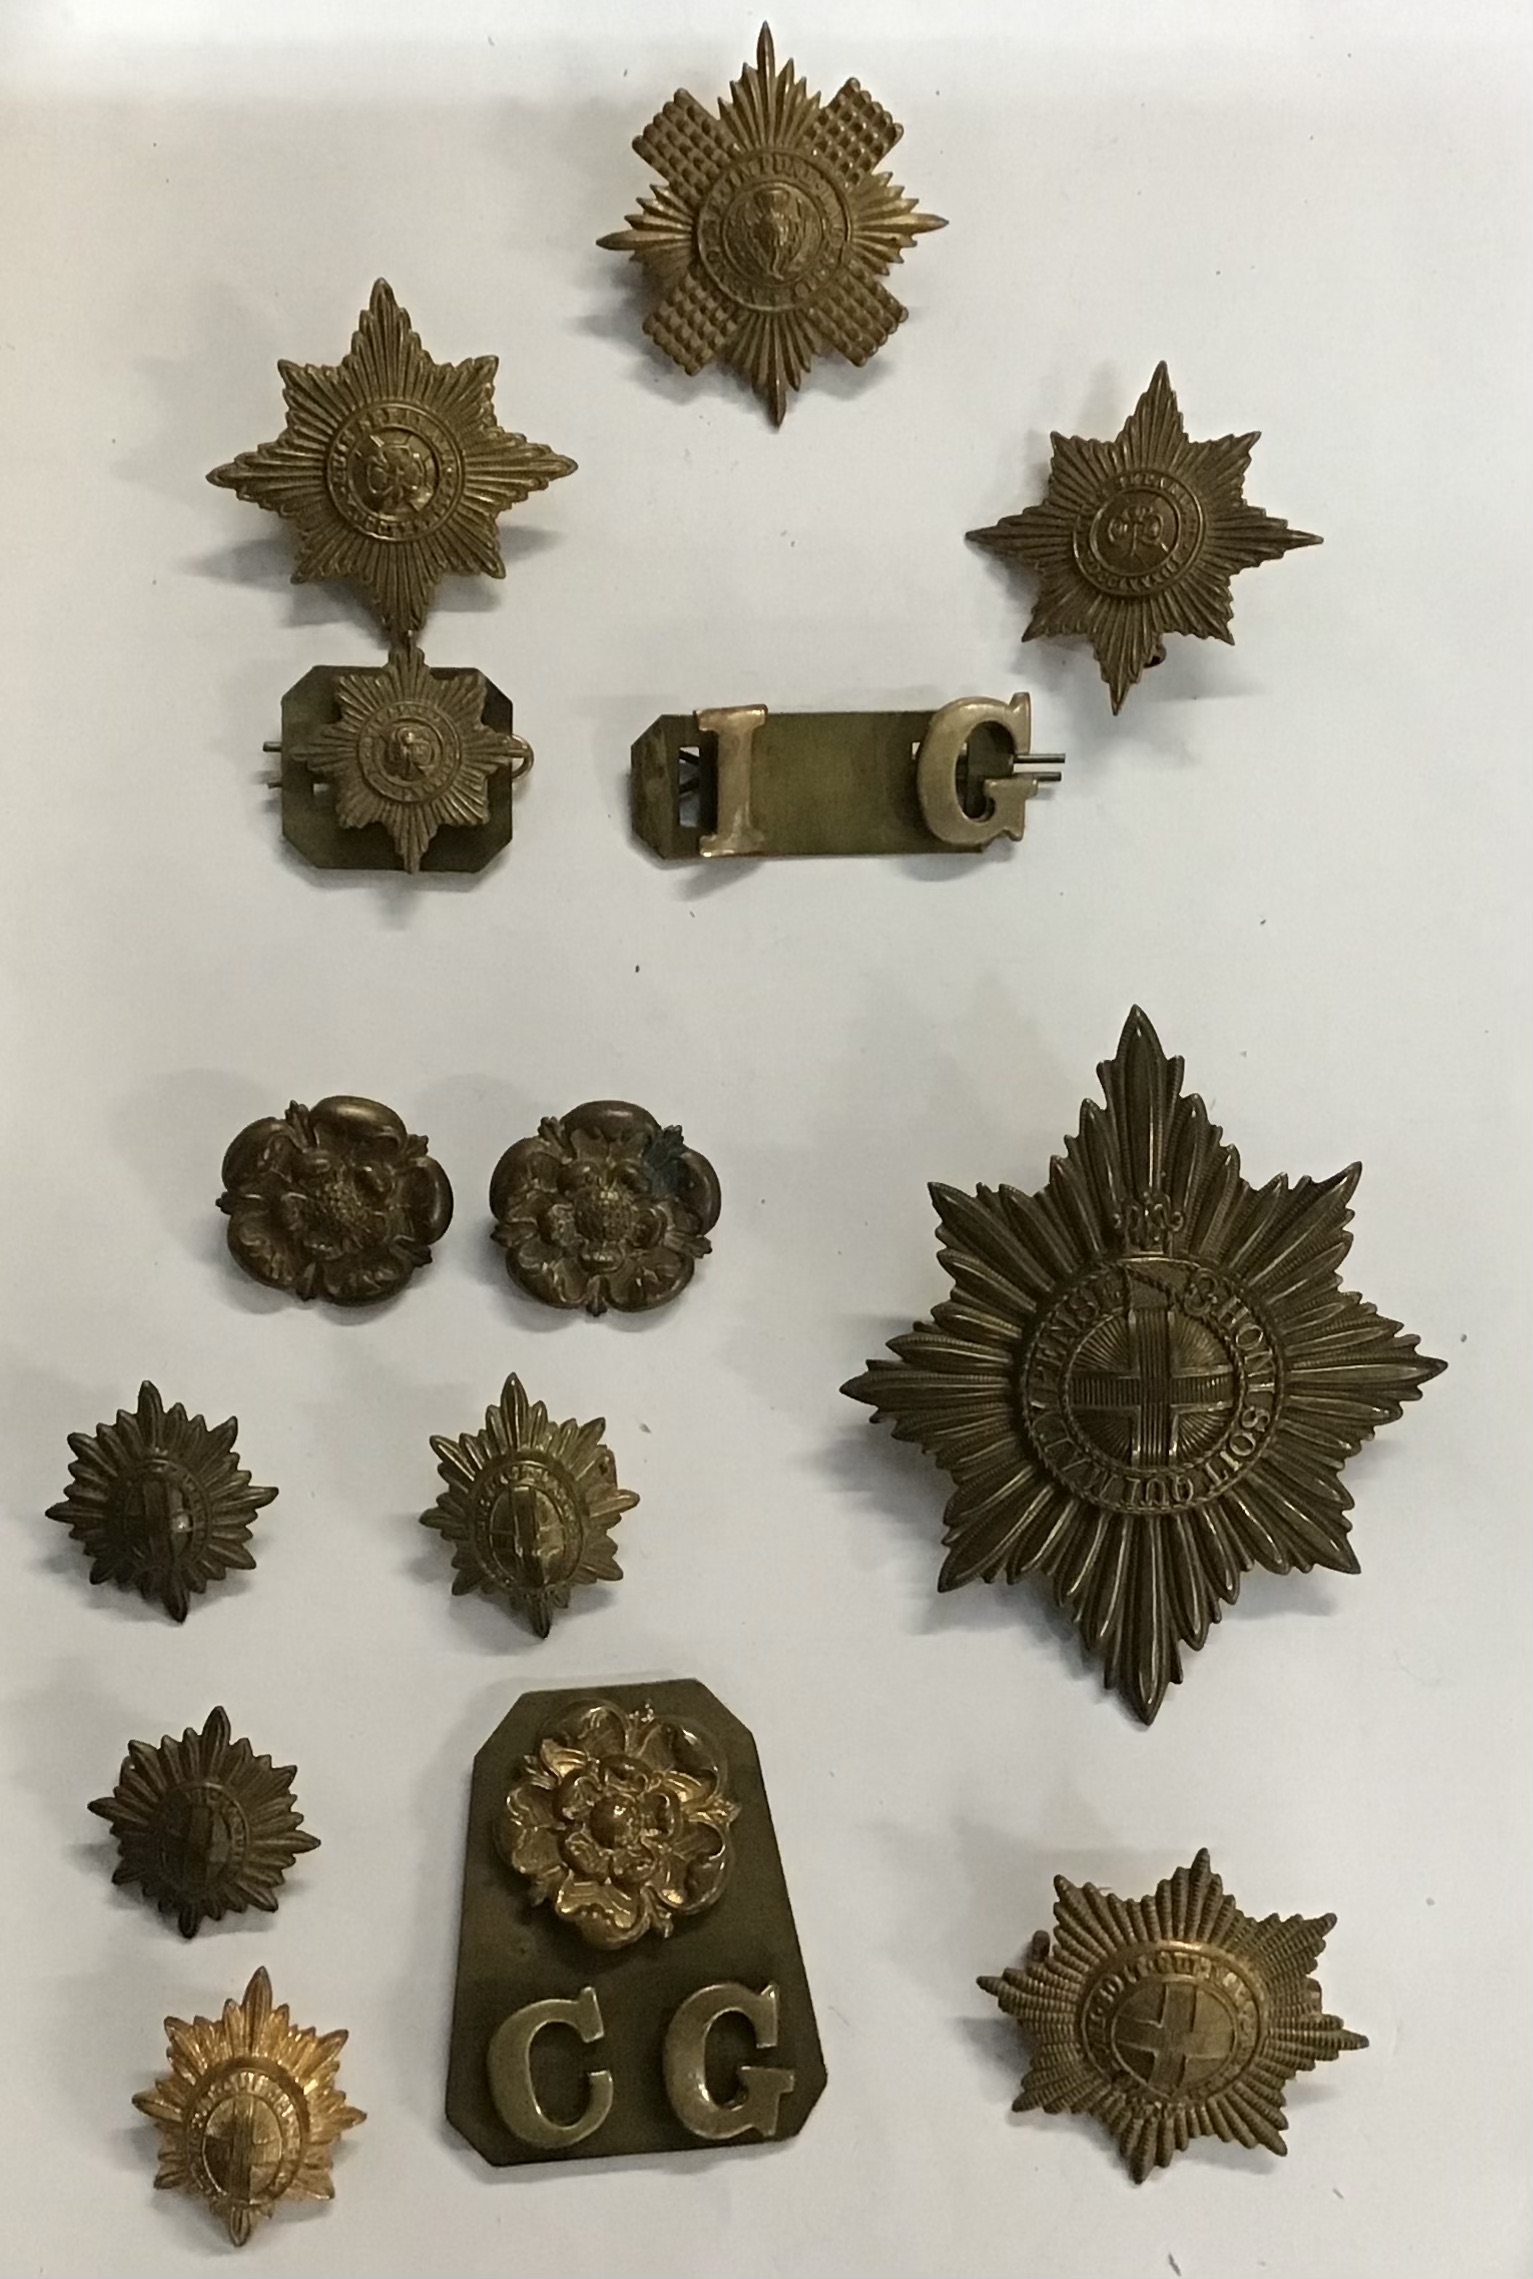 Collection of British Army Guards Uniform badges, includes First Life Guards, Grenadier Guards, - Image 2 of 3